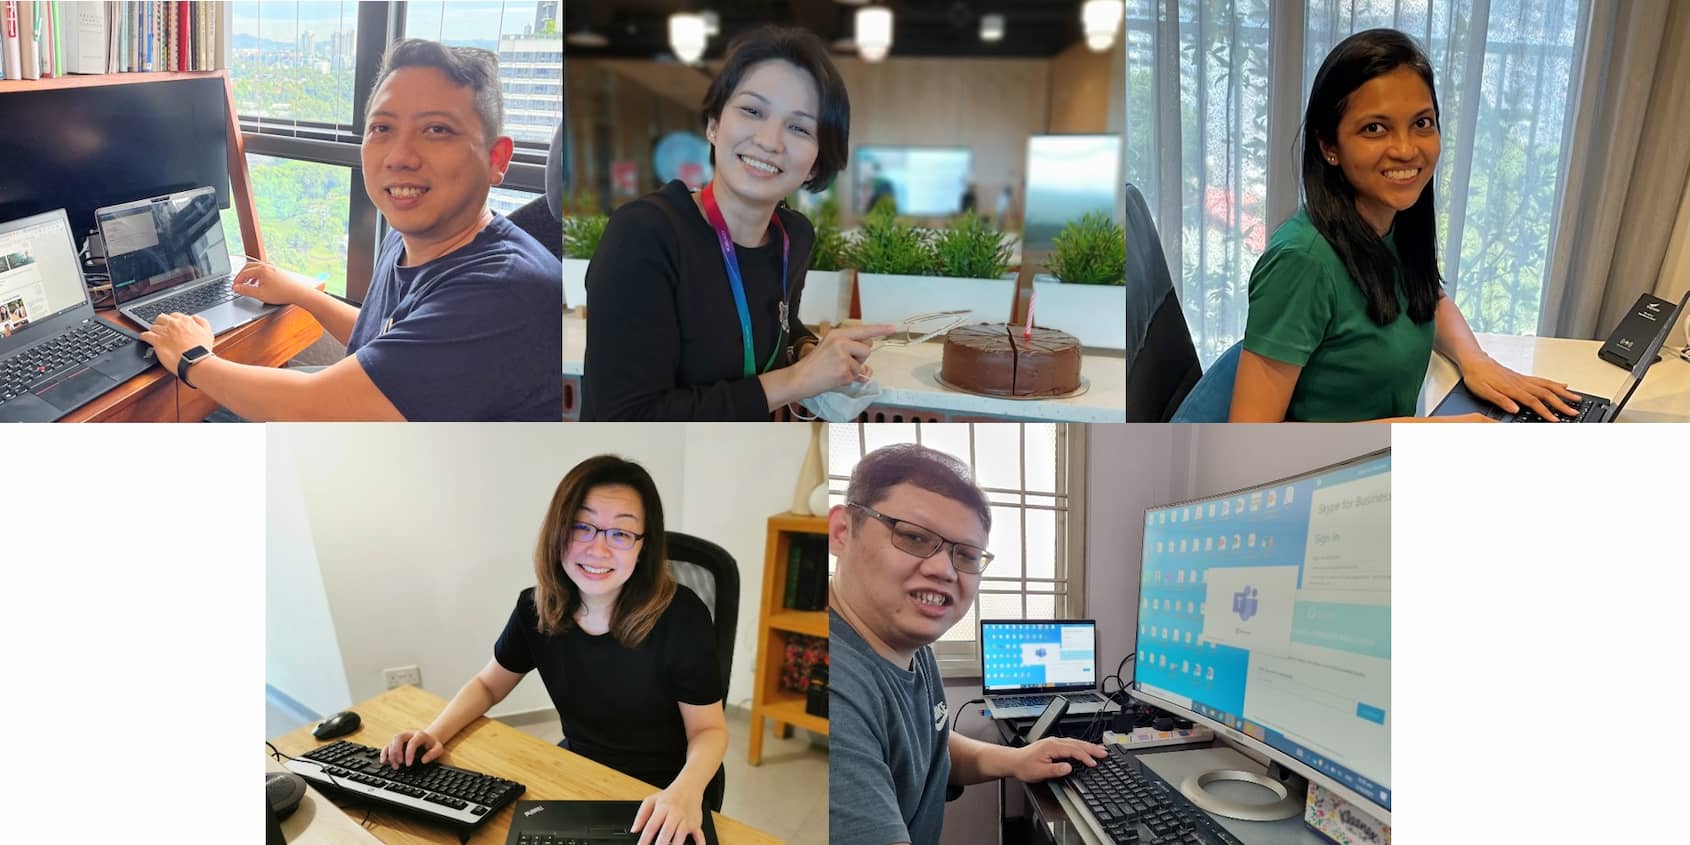 GovTechies working hard behind the scenes to help create digital products for Singaporeans